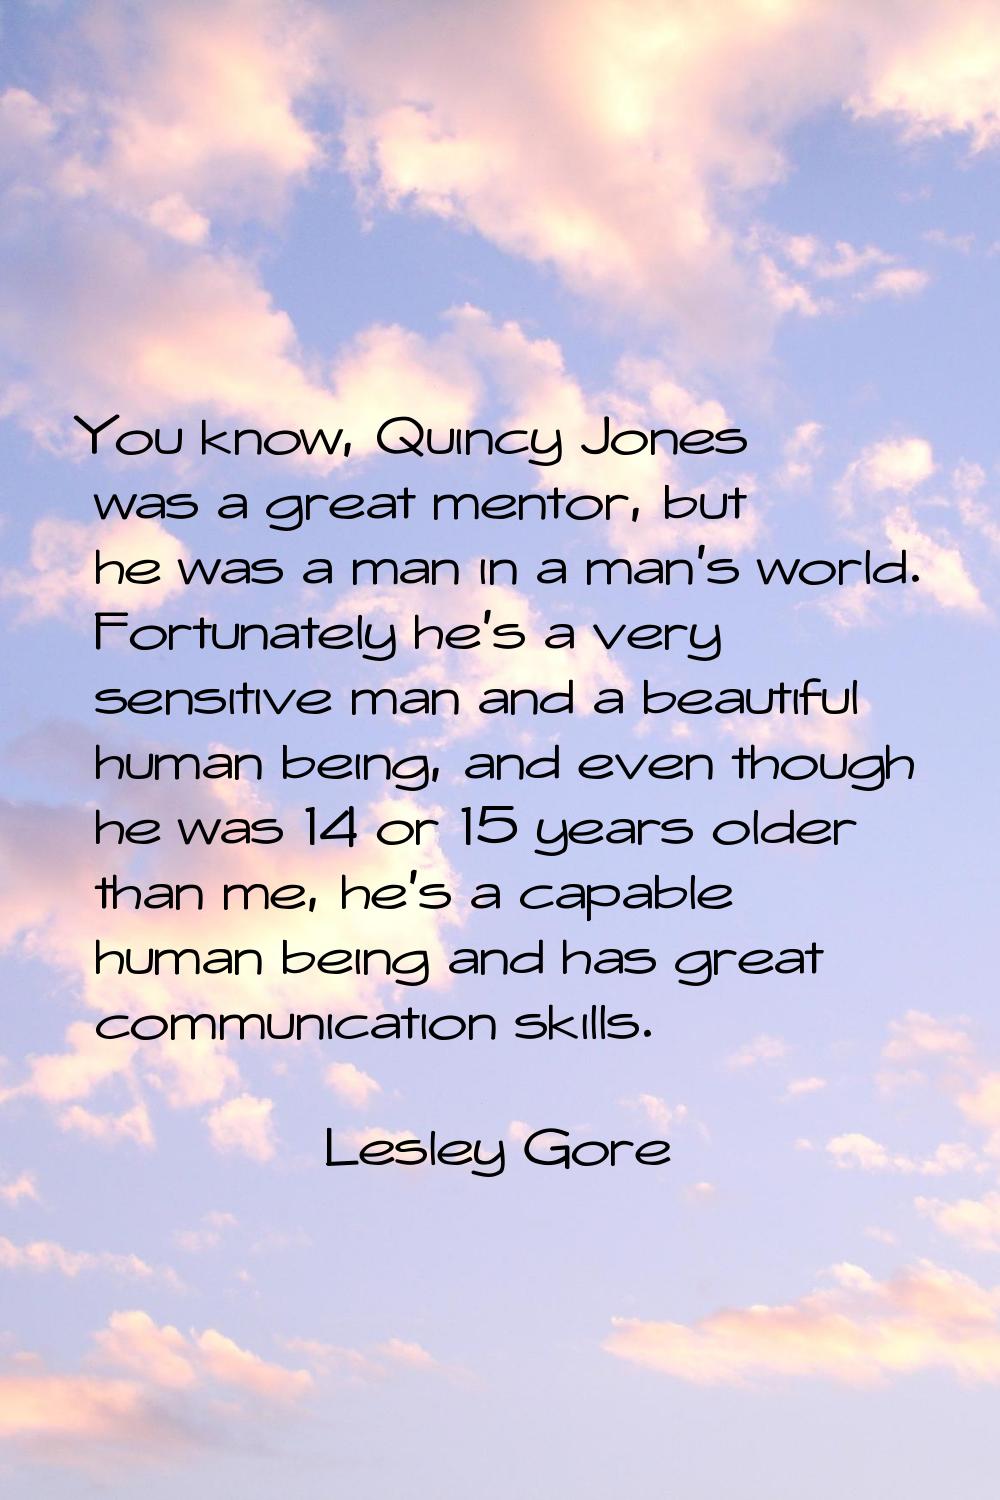 You know, Quincy Jones was a great mentor, but he was a man in a man's world. Fortunately he's a ve